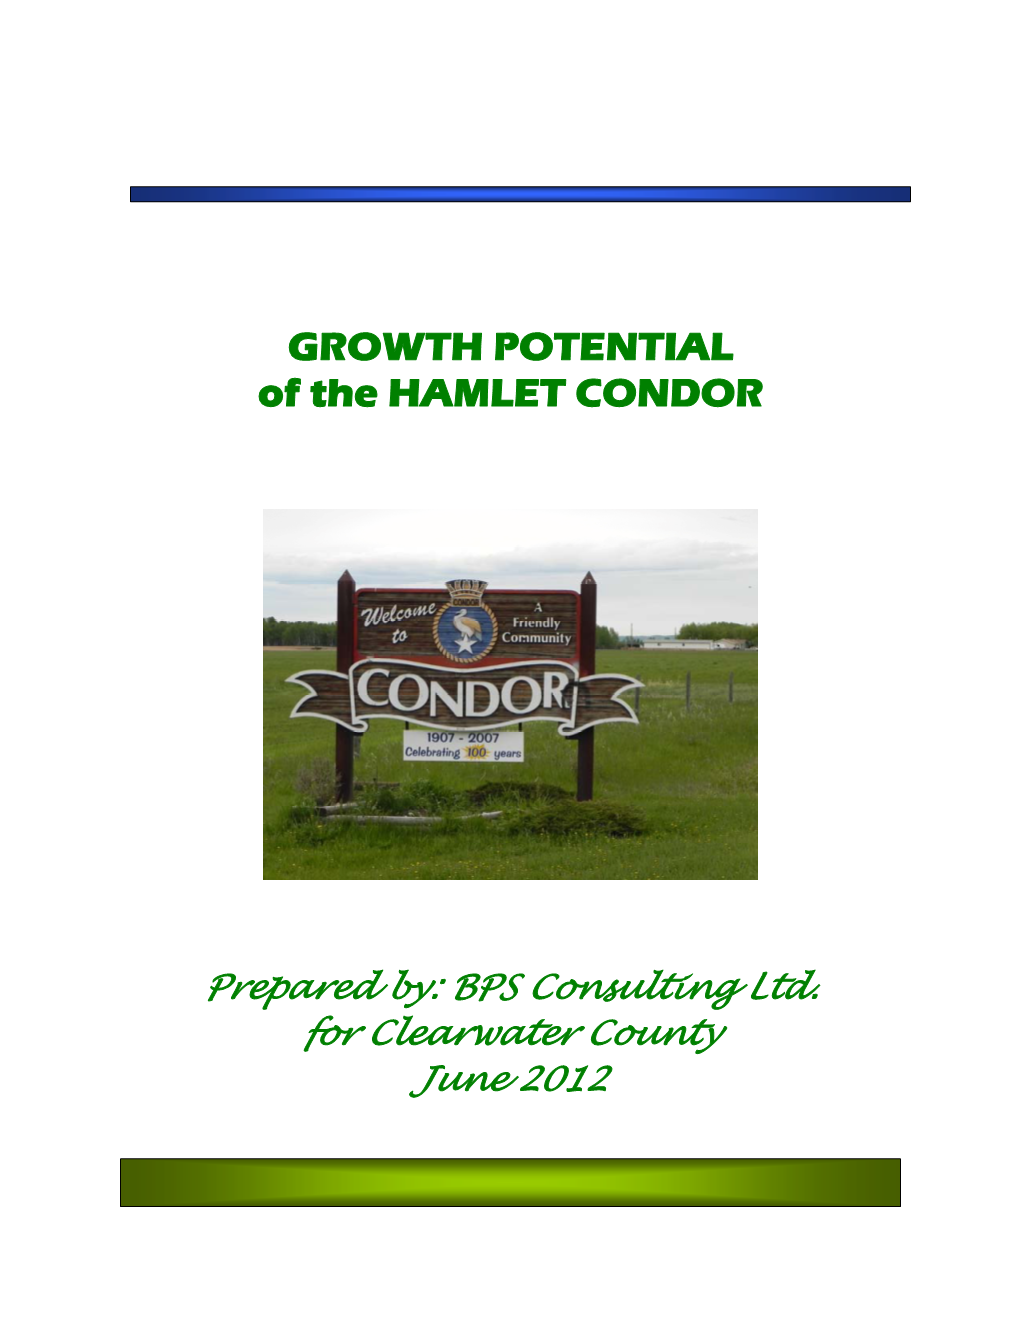 GROWTH POTENTIAL of the HAMLET CONDOR